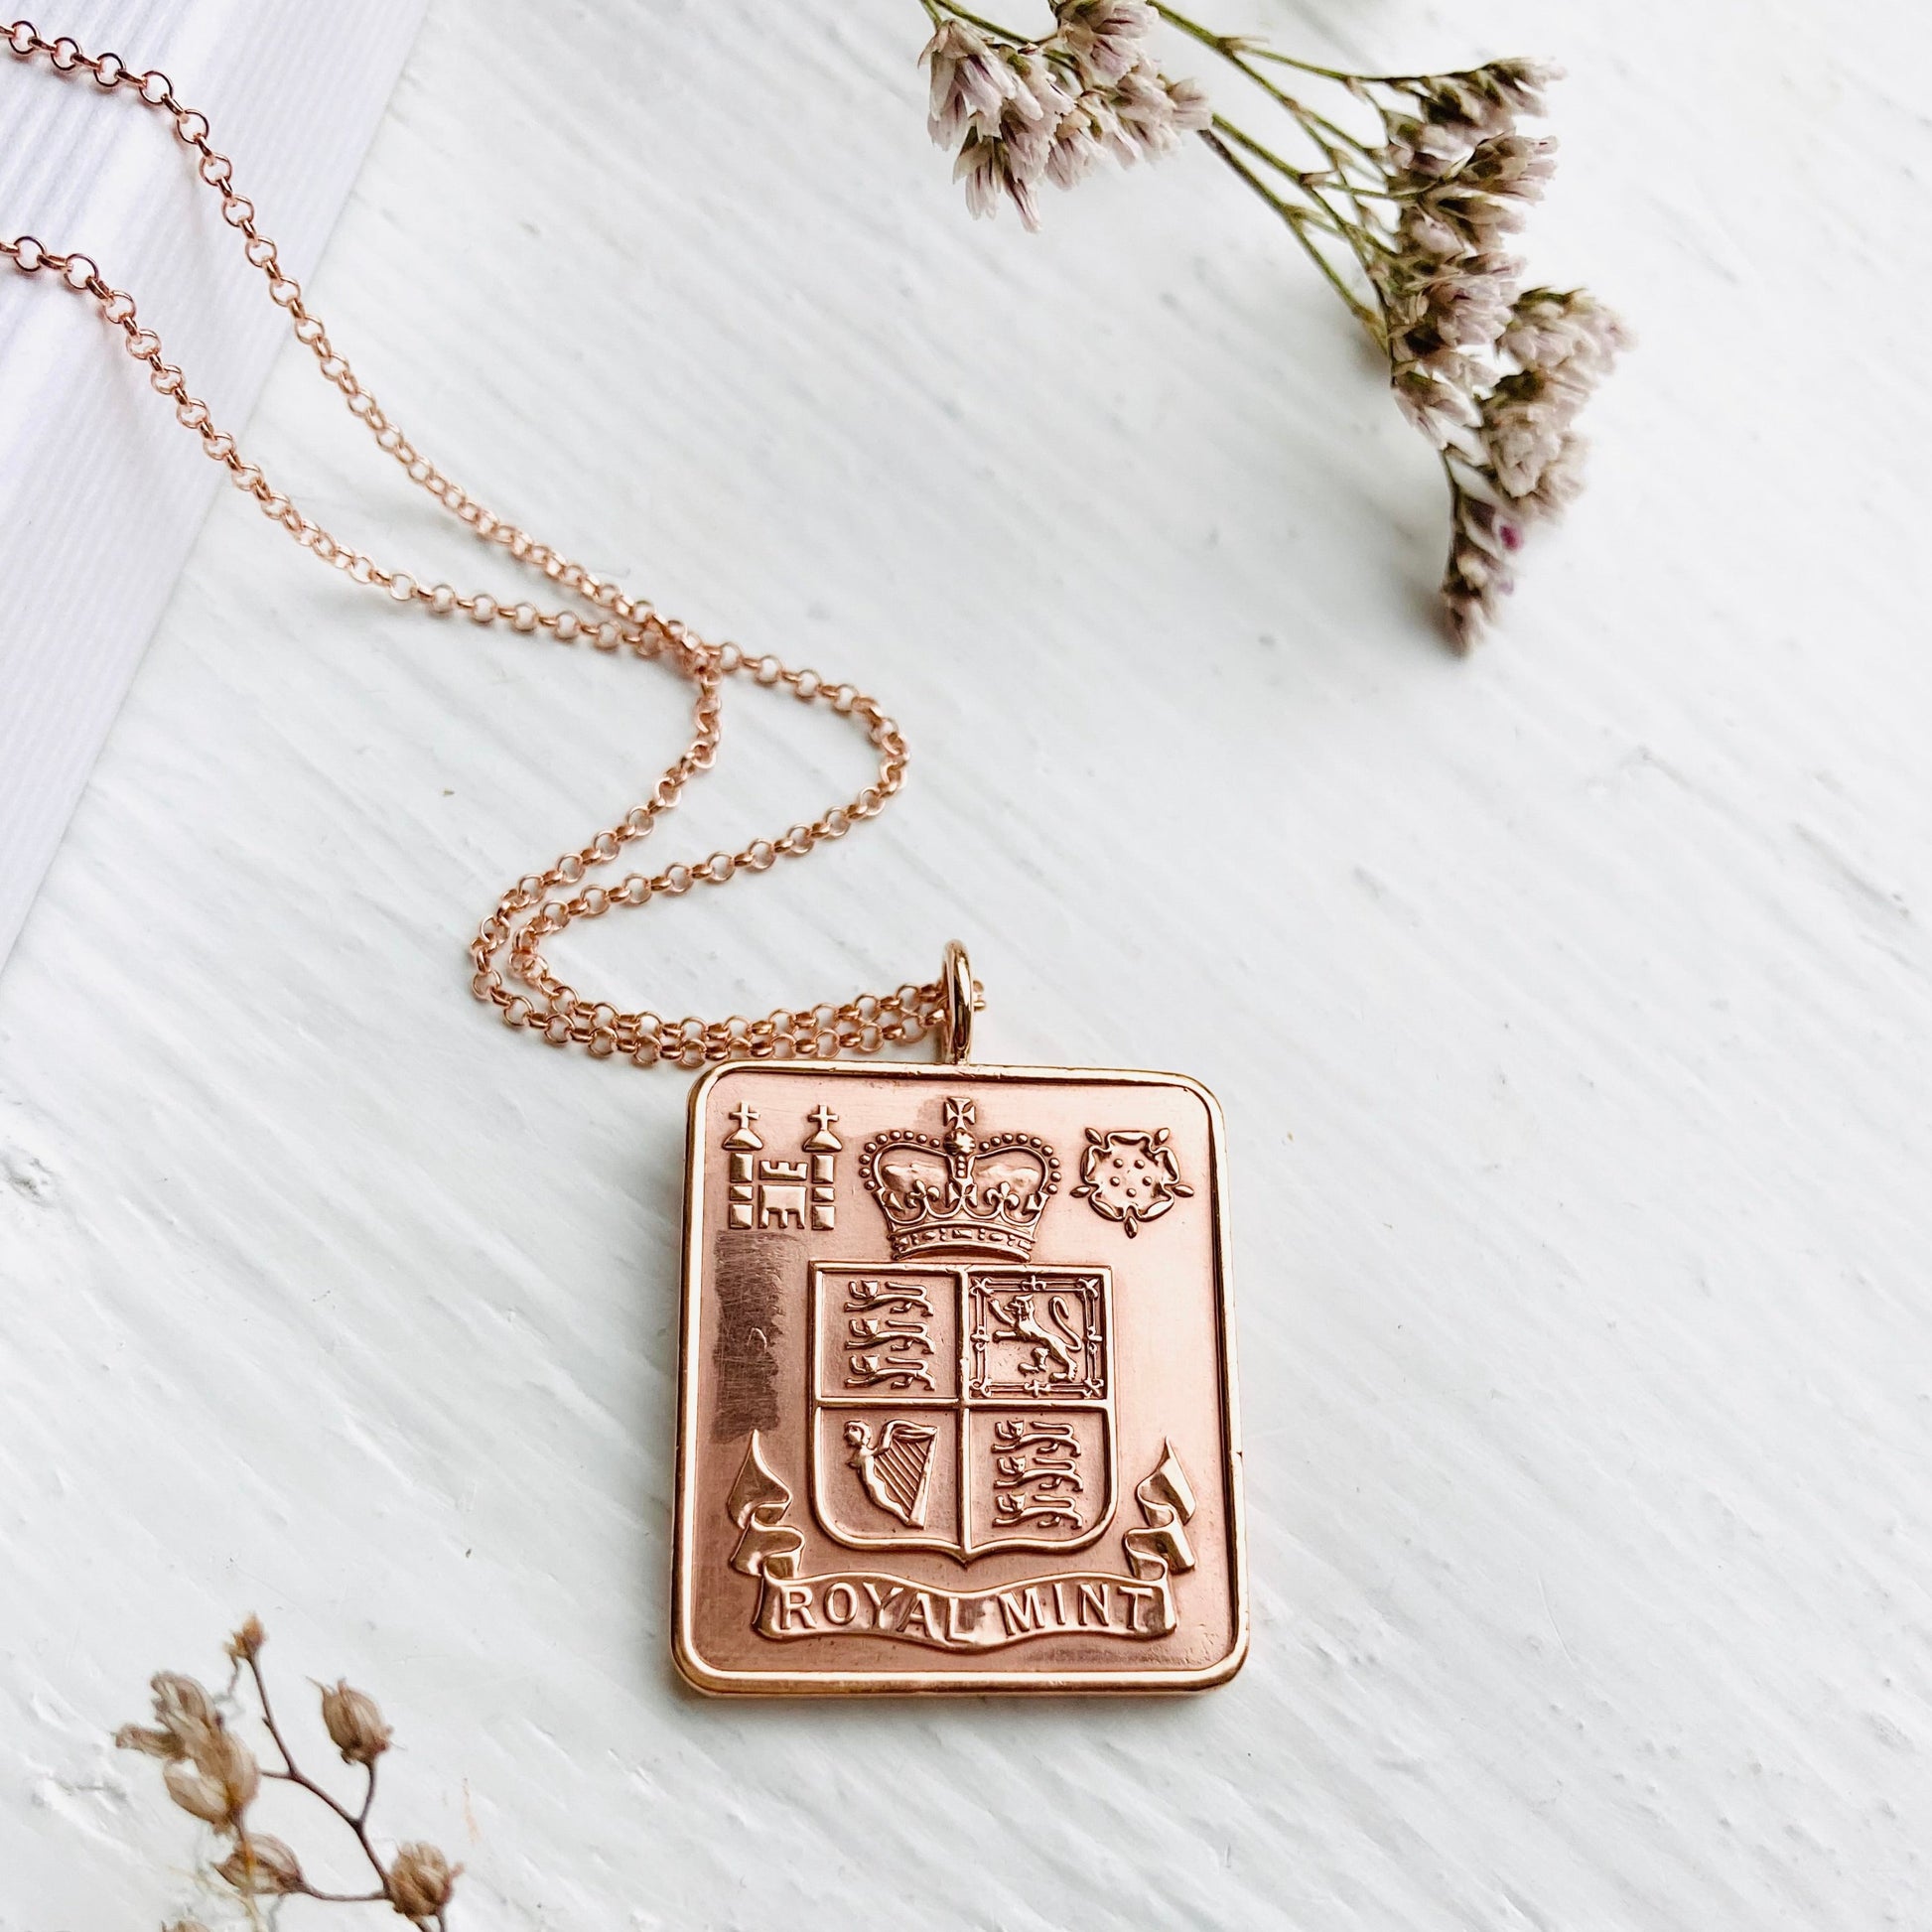 Royal Mint Token Medal necklace with rose gold chain, 50th gifts by Prenoa